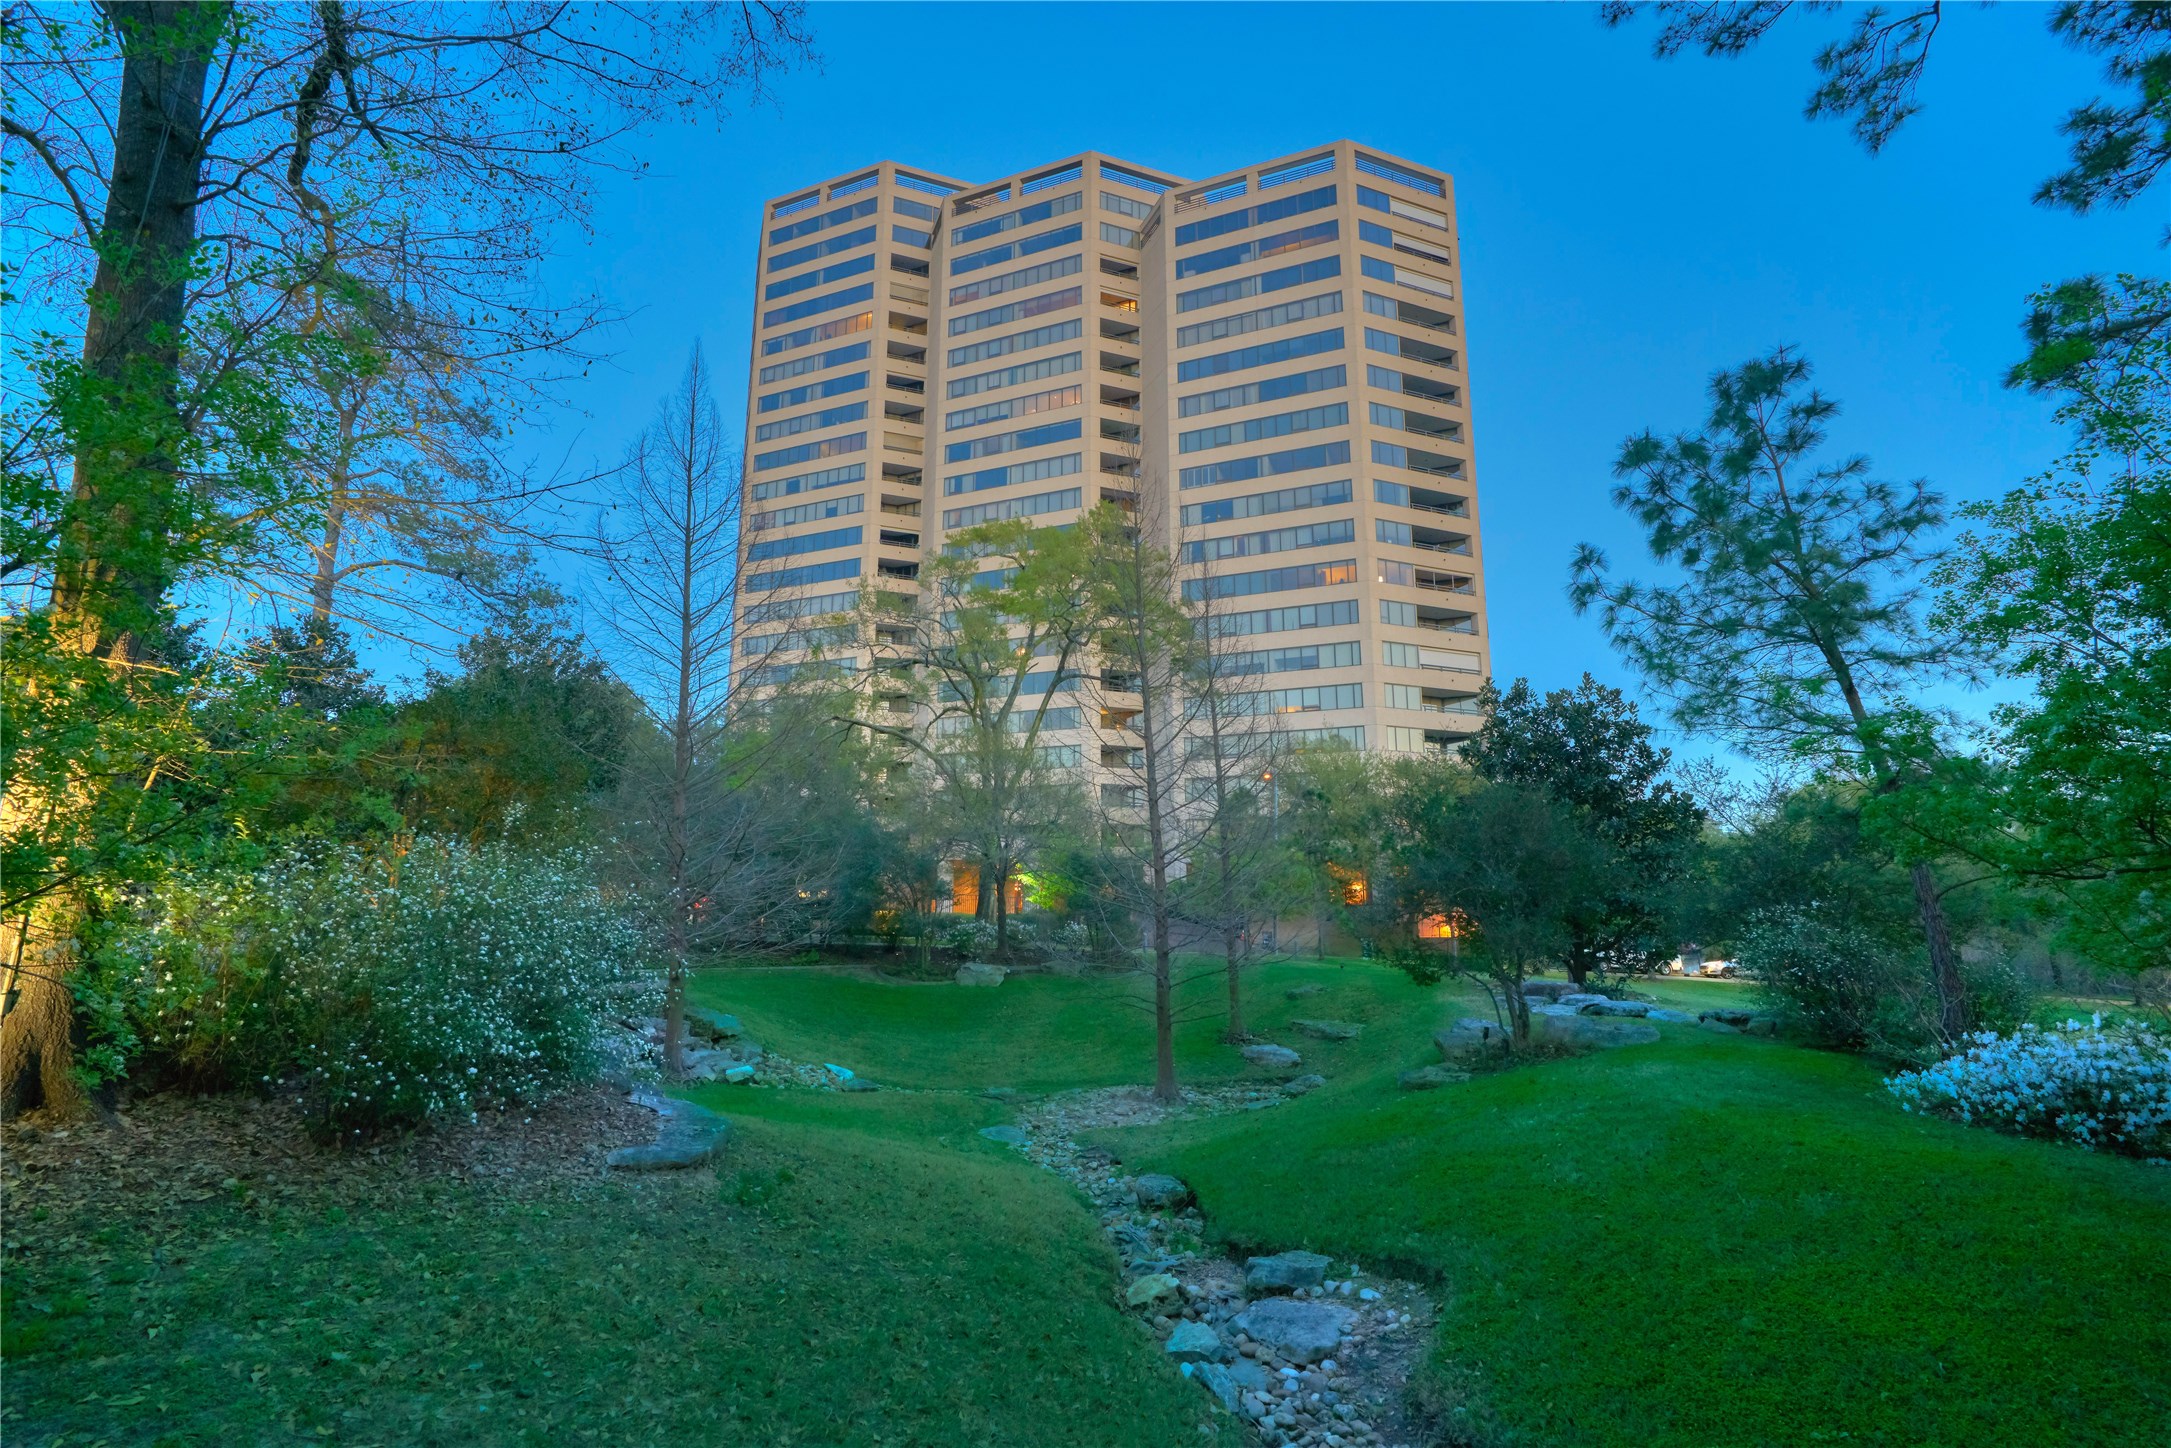 Permanently unobstructed views. Accessible to Downtown, Galleria, Medical Center, Freeways. Full service buidling.